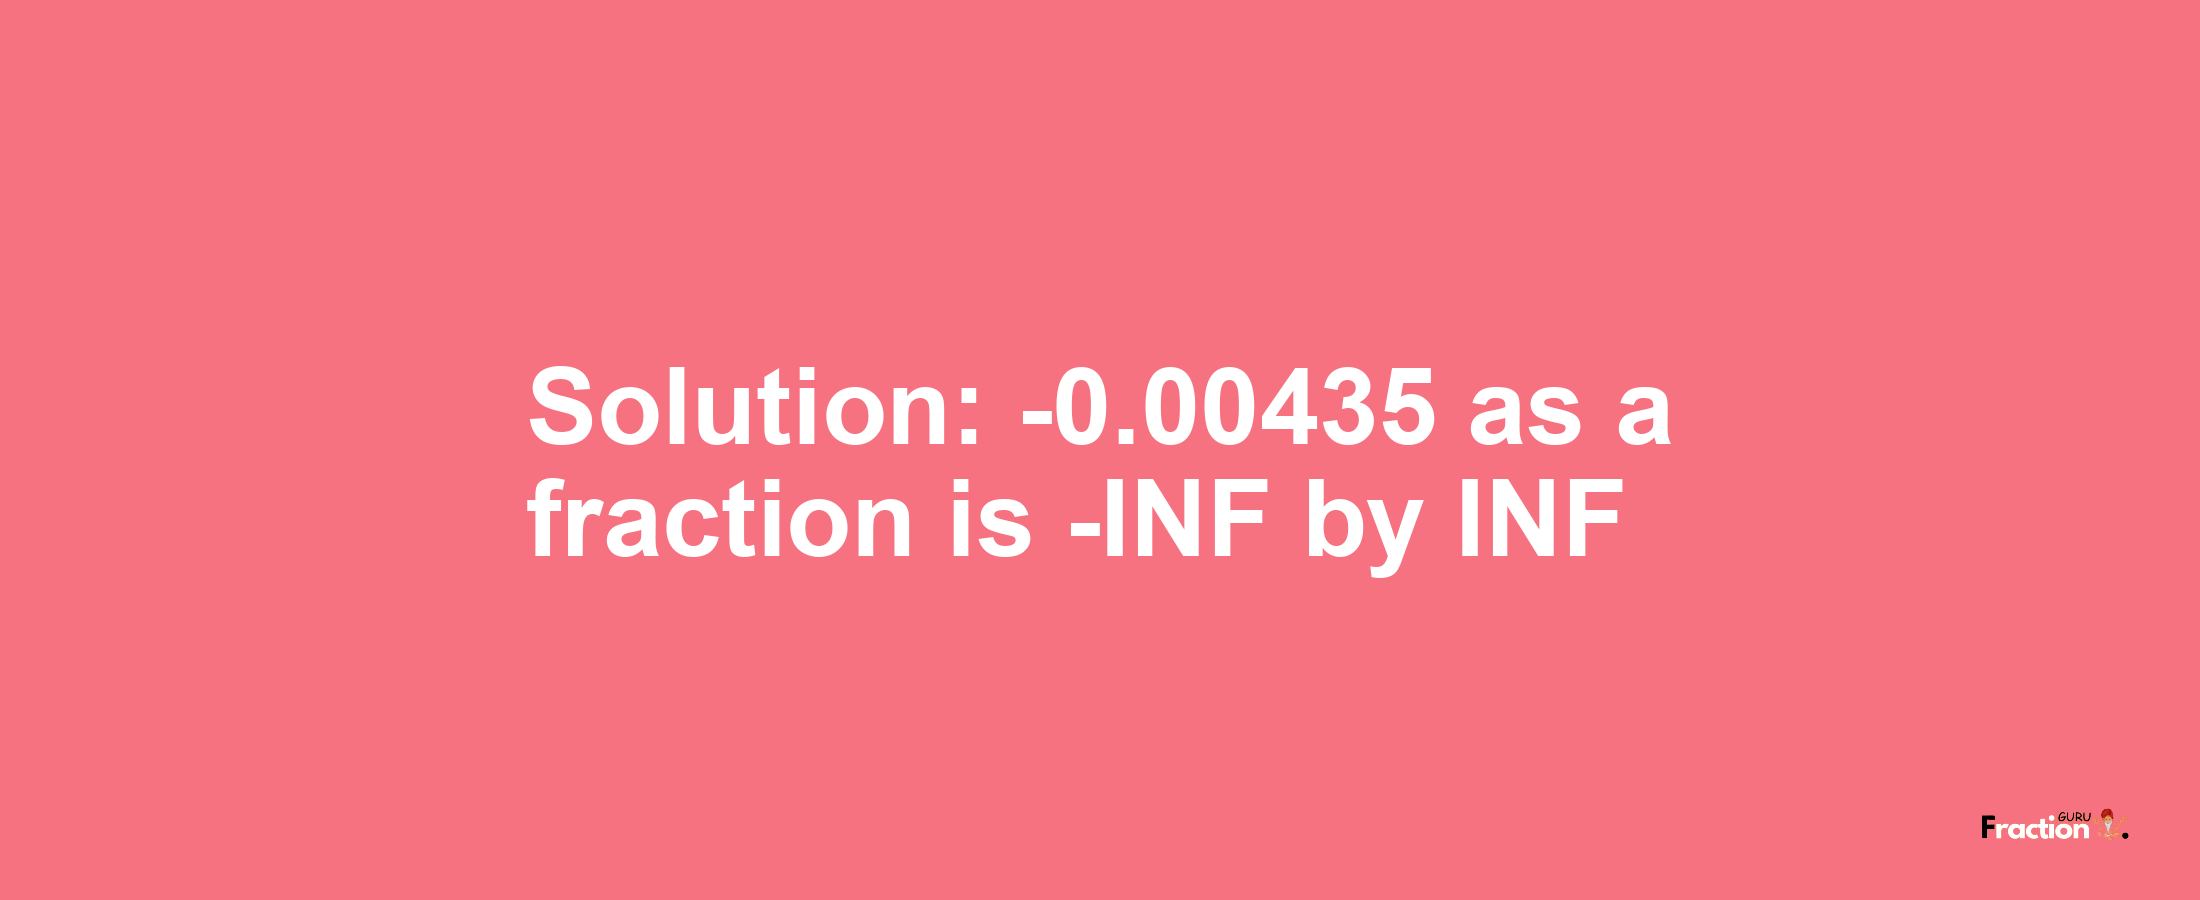 Solution:-0.00435 as a fraction is -INF/INF